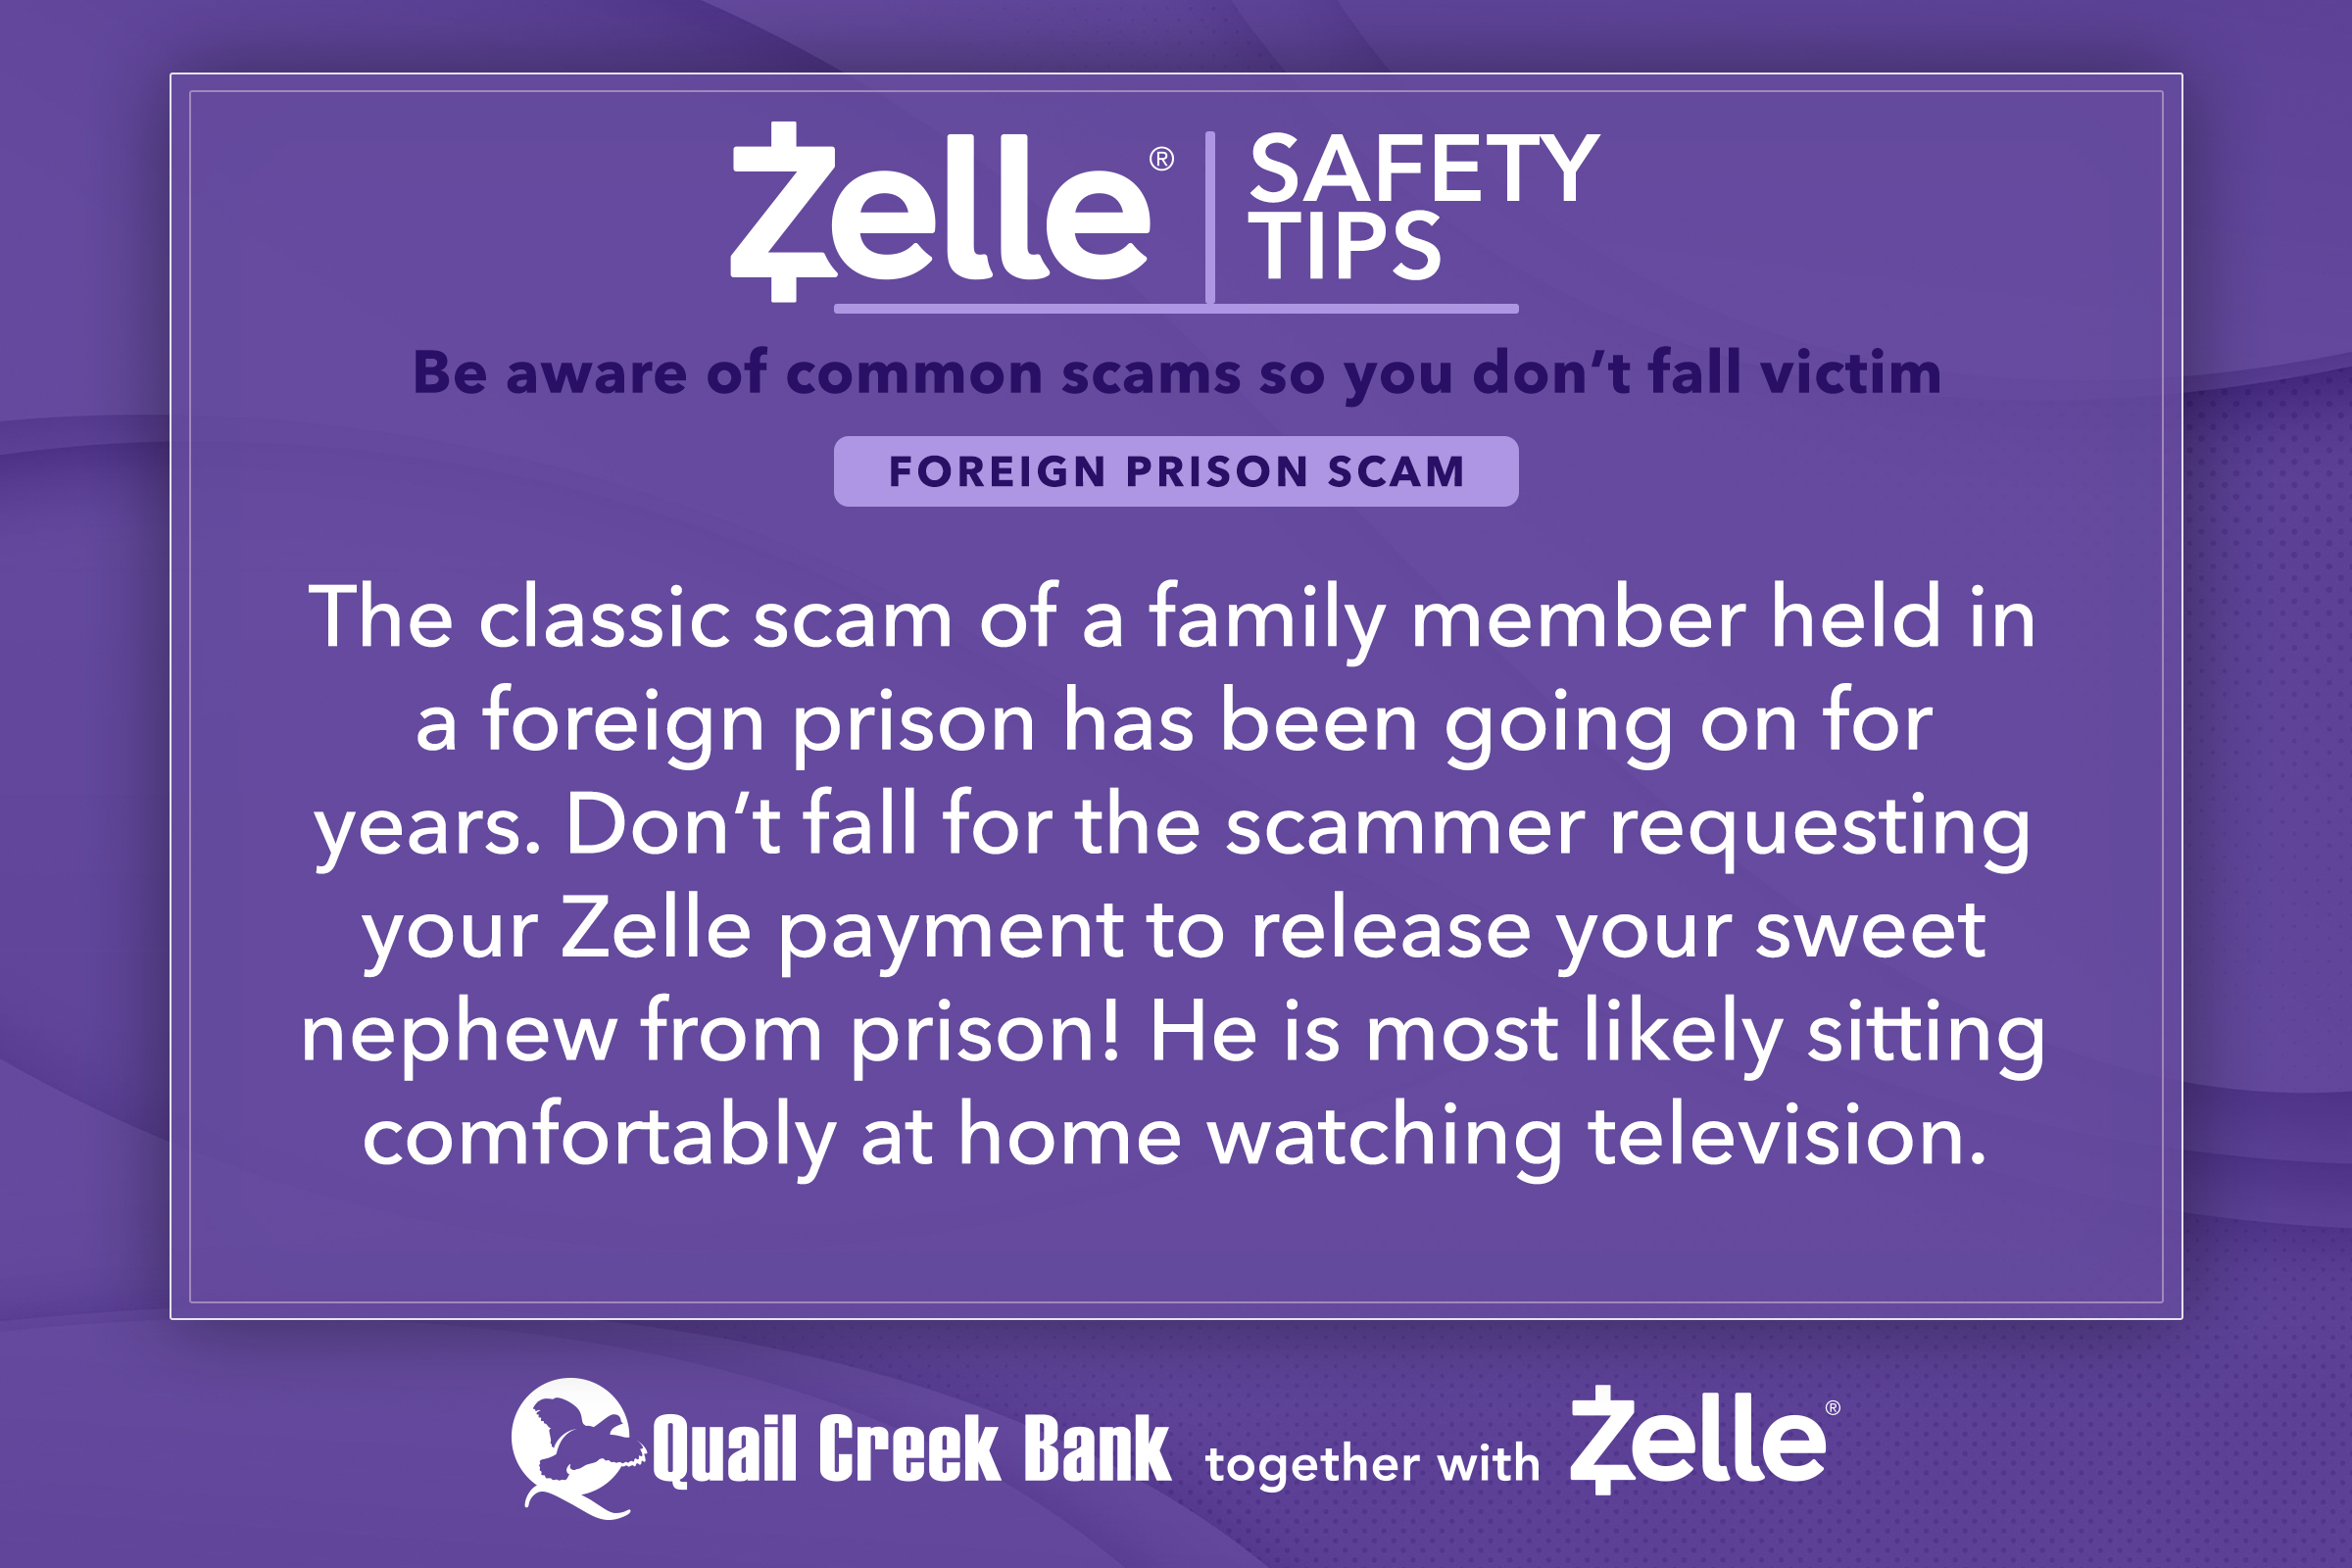 Zelle Tips - Foreign Prison Scam